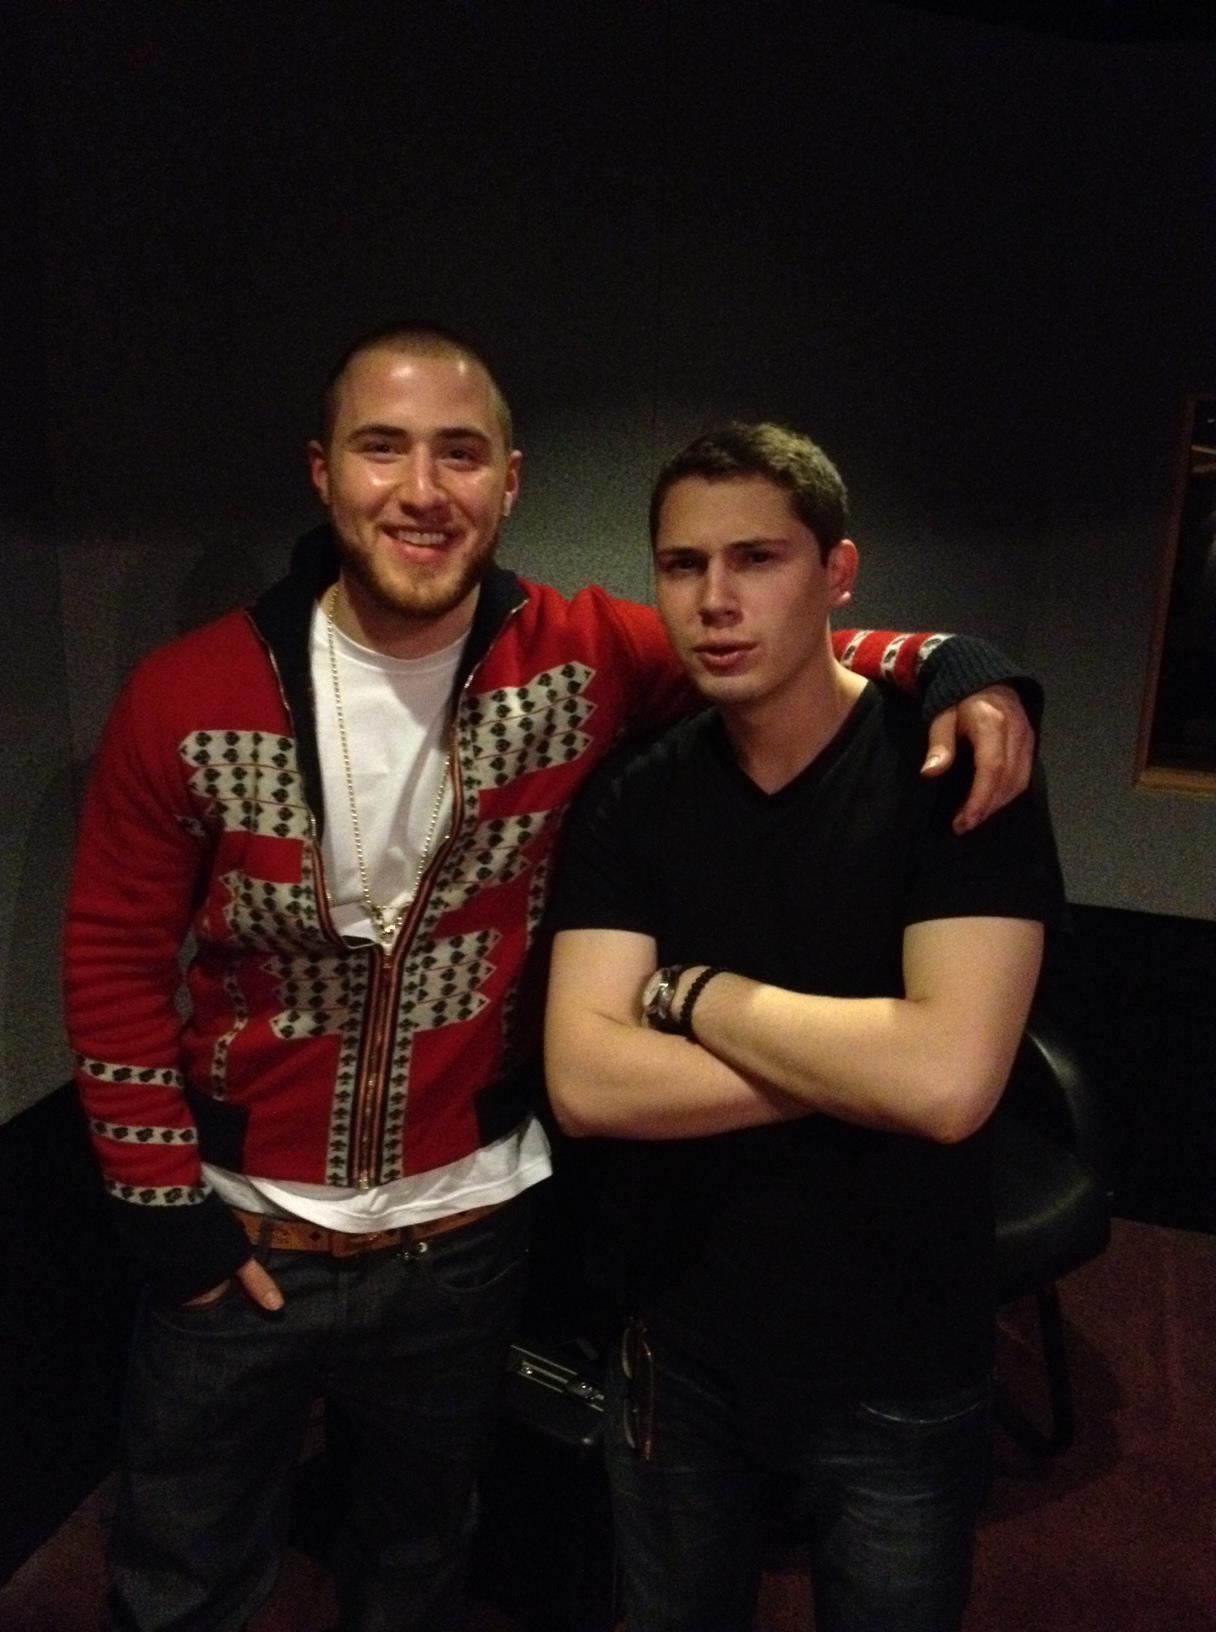 Mike Posner and Cris Cab in the studio March 2012
